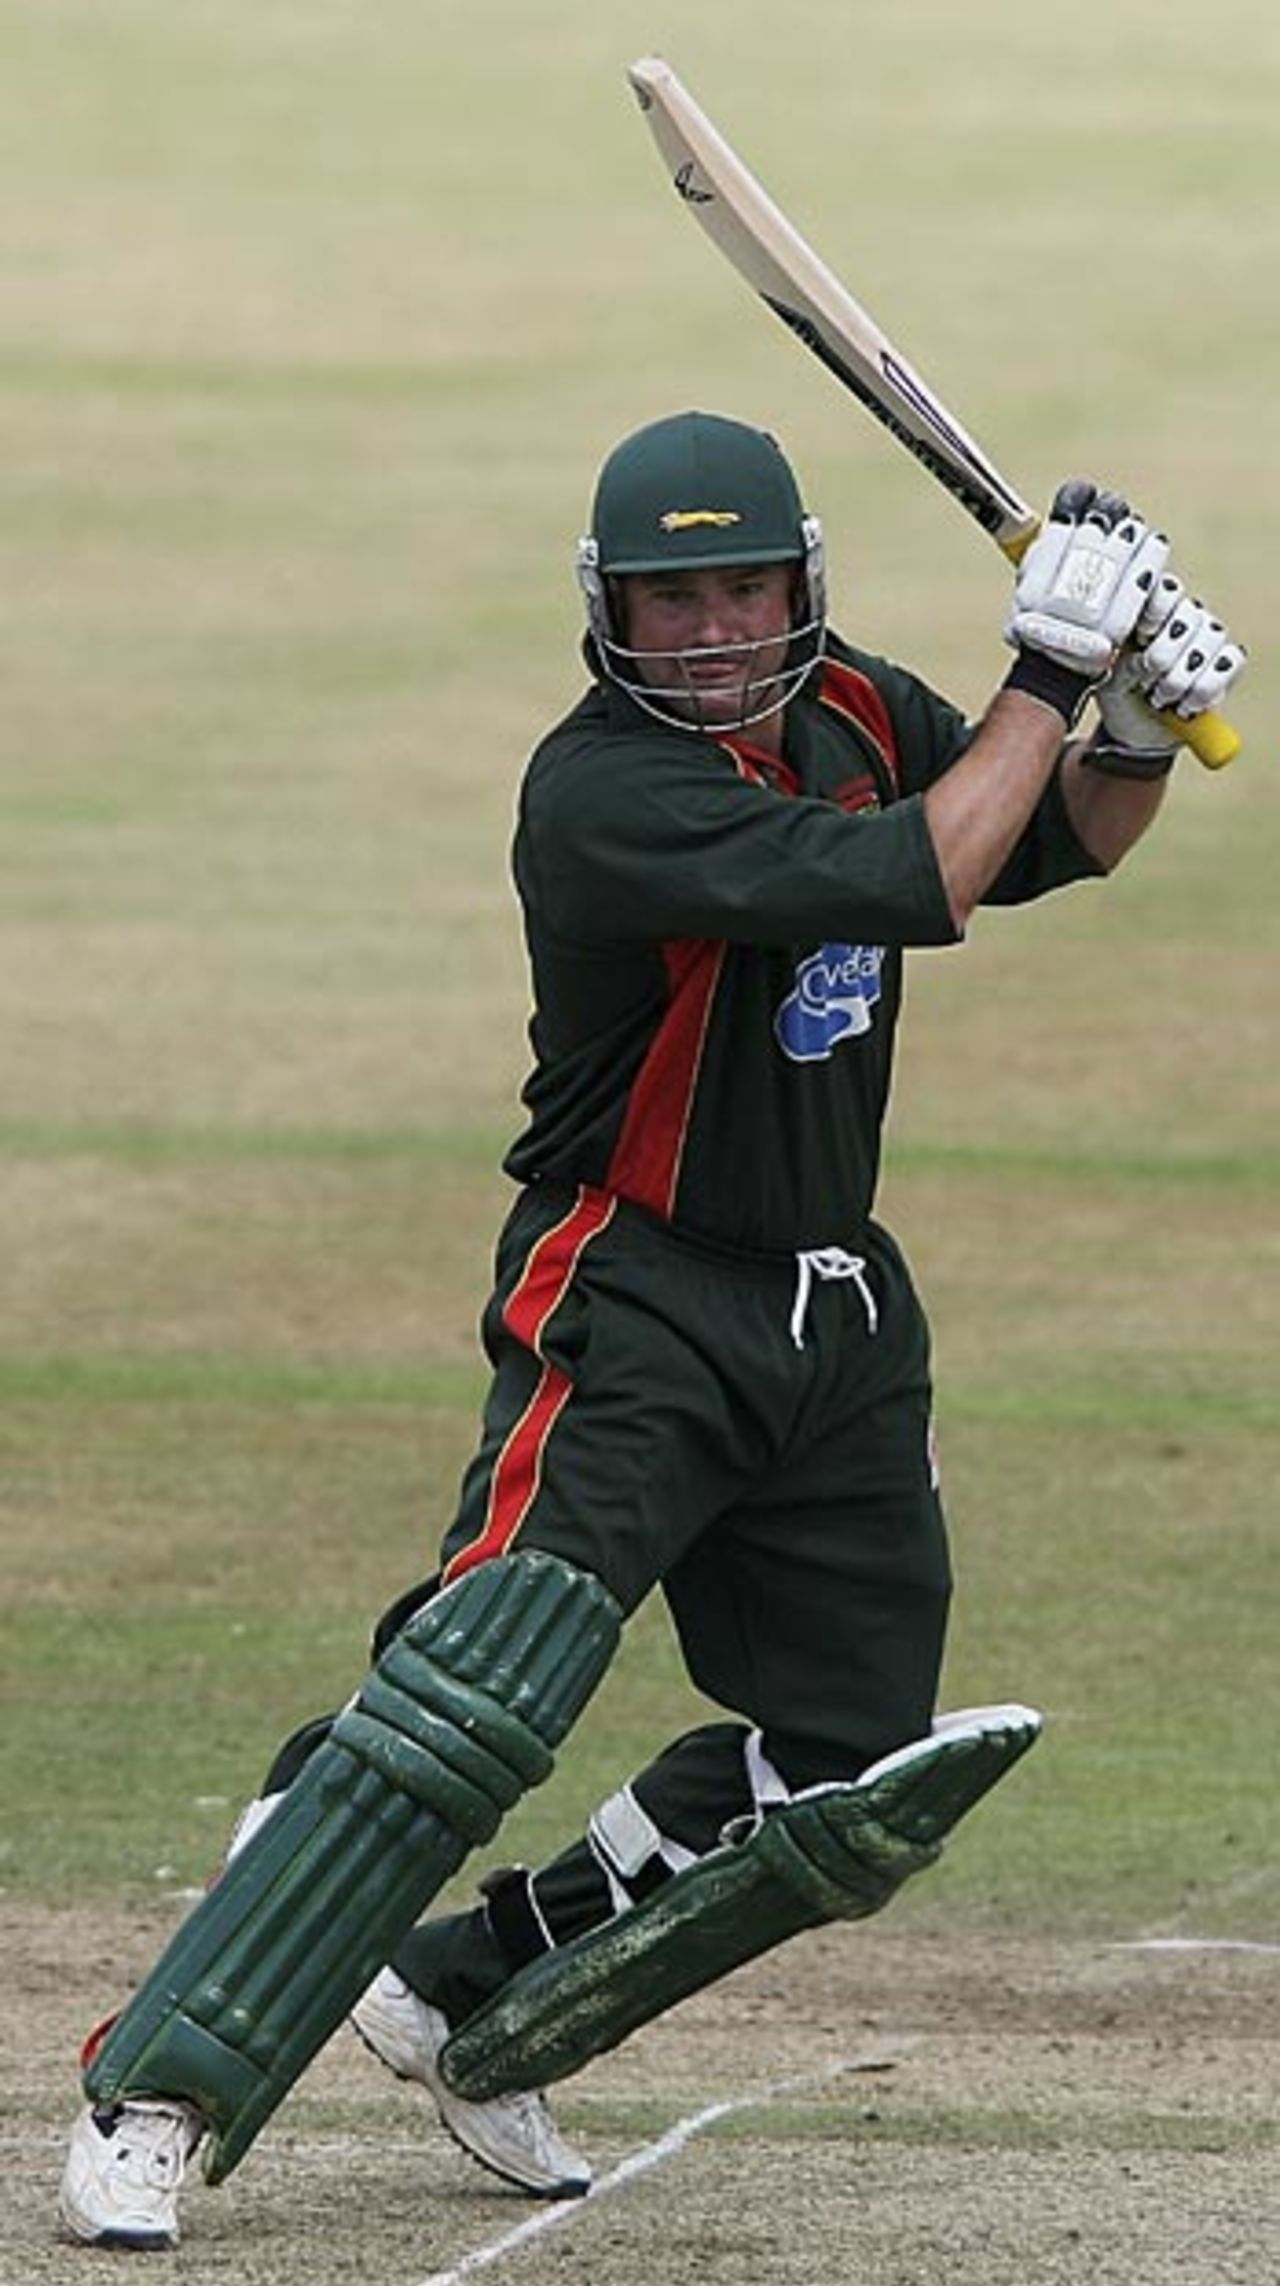 Darren Robinson cuts off the back foot, Gloucestershire v Leicestershire, Pro40, Cheltenham, August 1, 2006